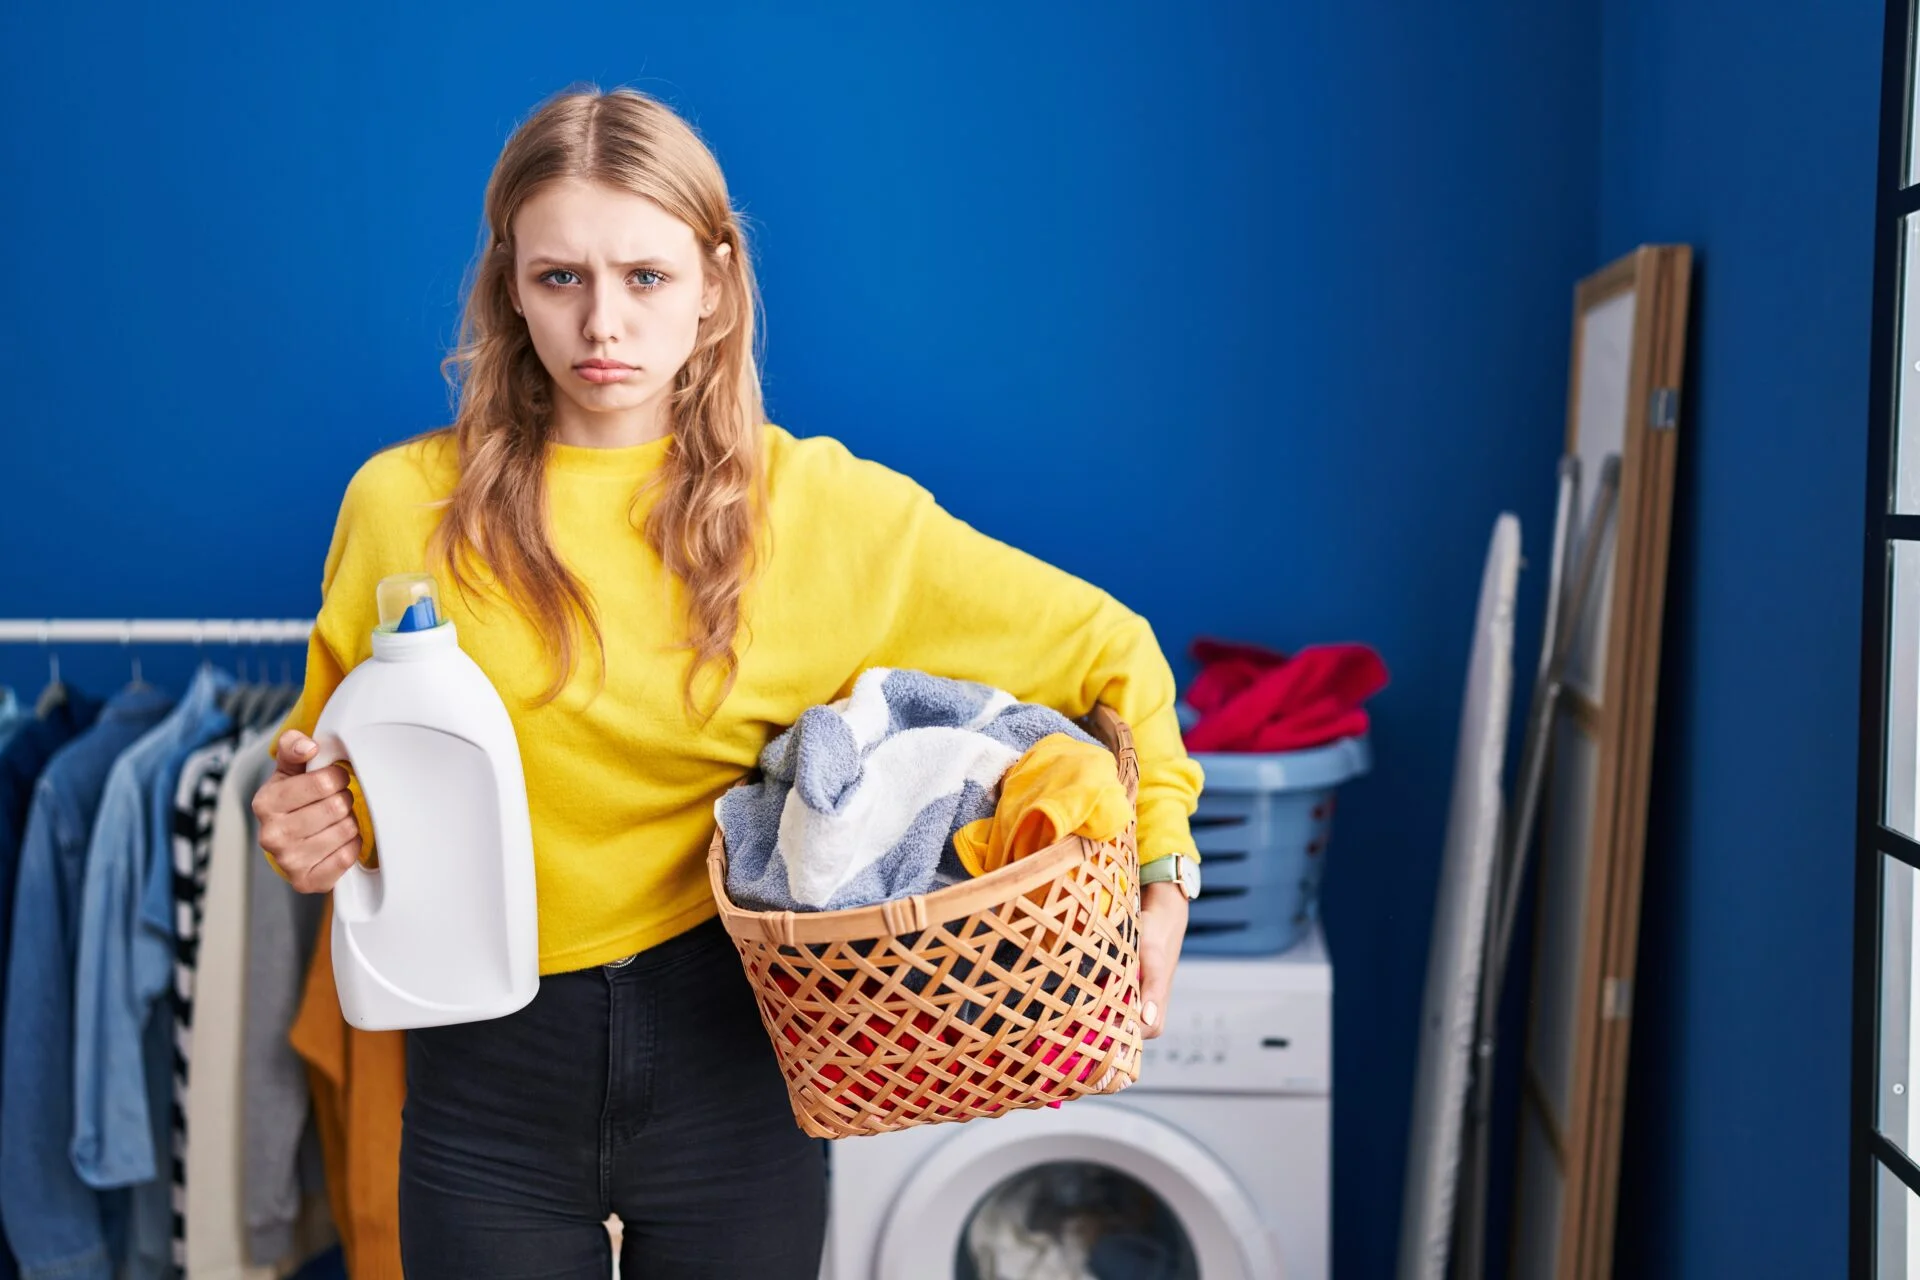 Young caucasian woman holding laundry basket and detergent bottle depressed and worry for distress, crying angry and afraid because her laundry detergent sheets may contain PFAS "forever chemicals". 